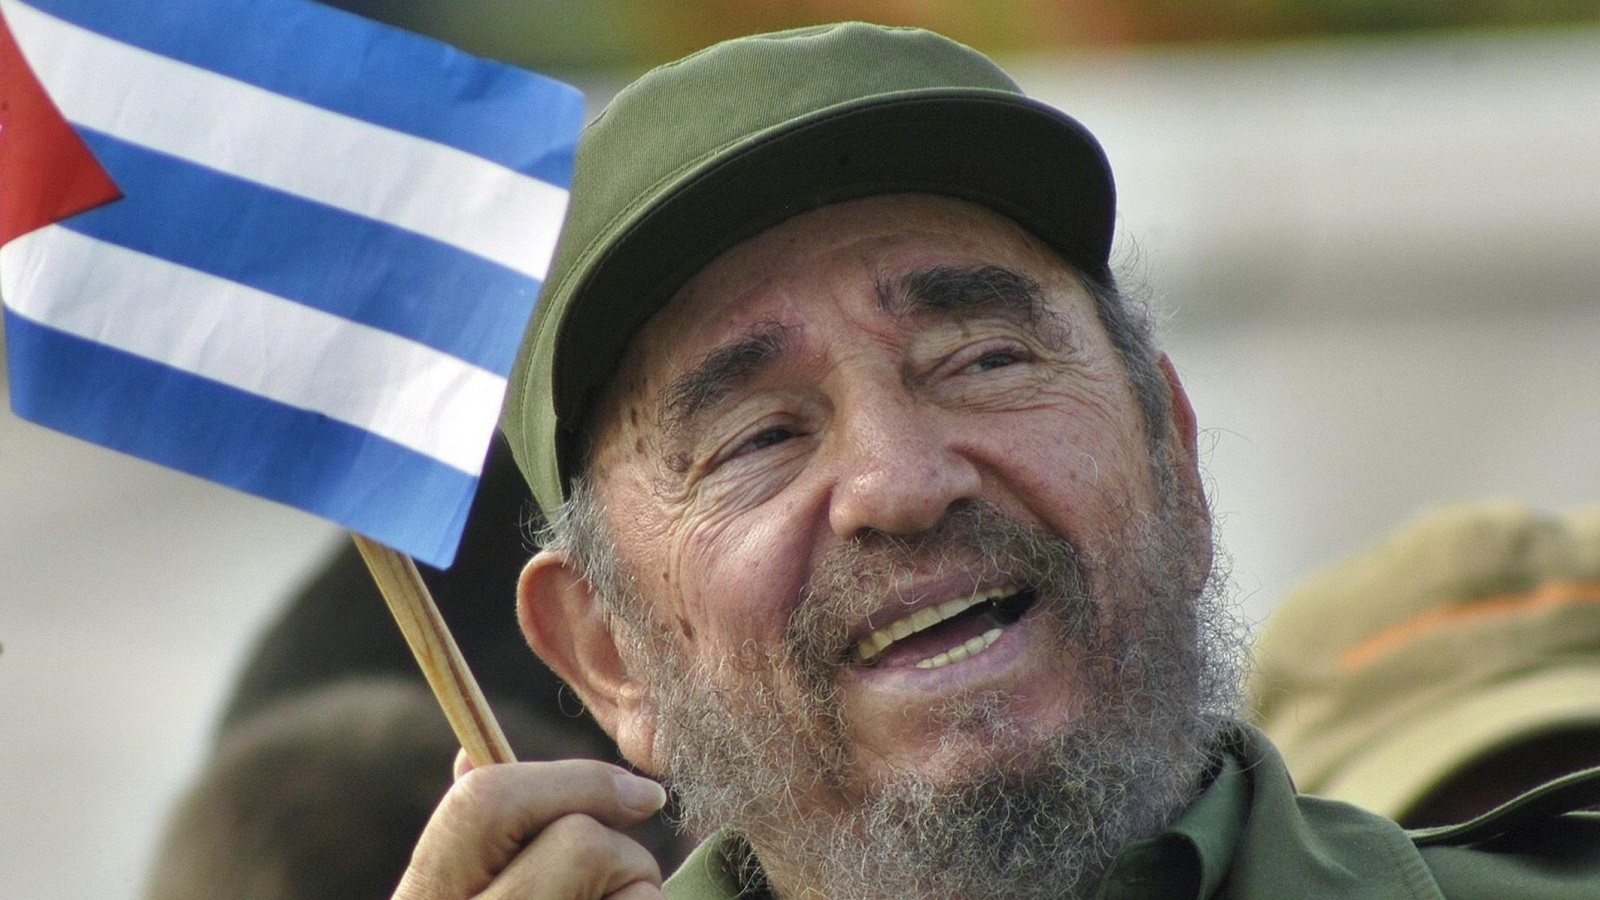 (FILE) A file picture dated 01 May 2005 shows Cuban then President Fidel Castro waving a national flag during a May Day ceremony at Revolution Square in Havana, Cuba. According to a Cuban state TV broadcast, Cuban former President Fidel Castro has died at the age of 90 on 25 November 2016.